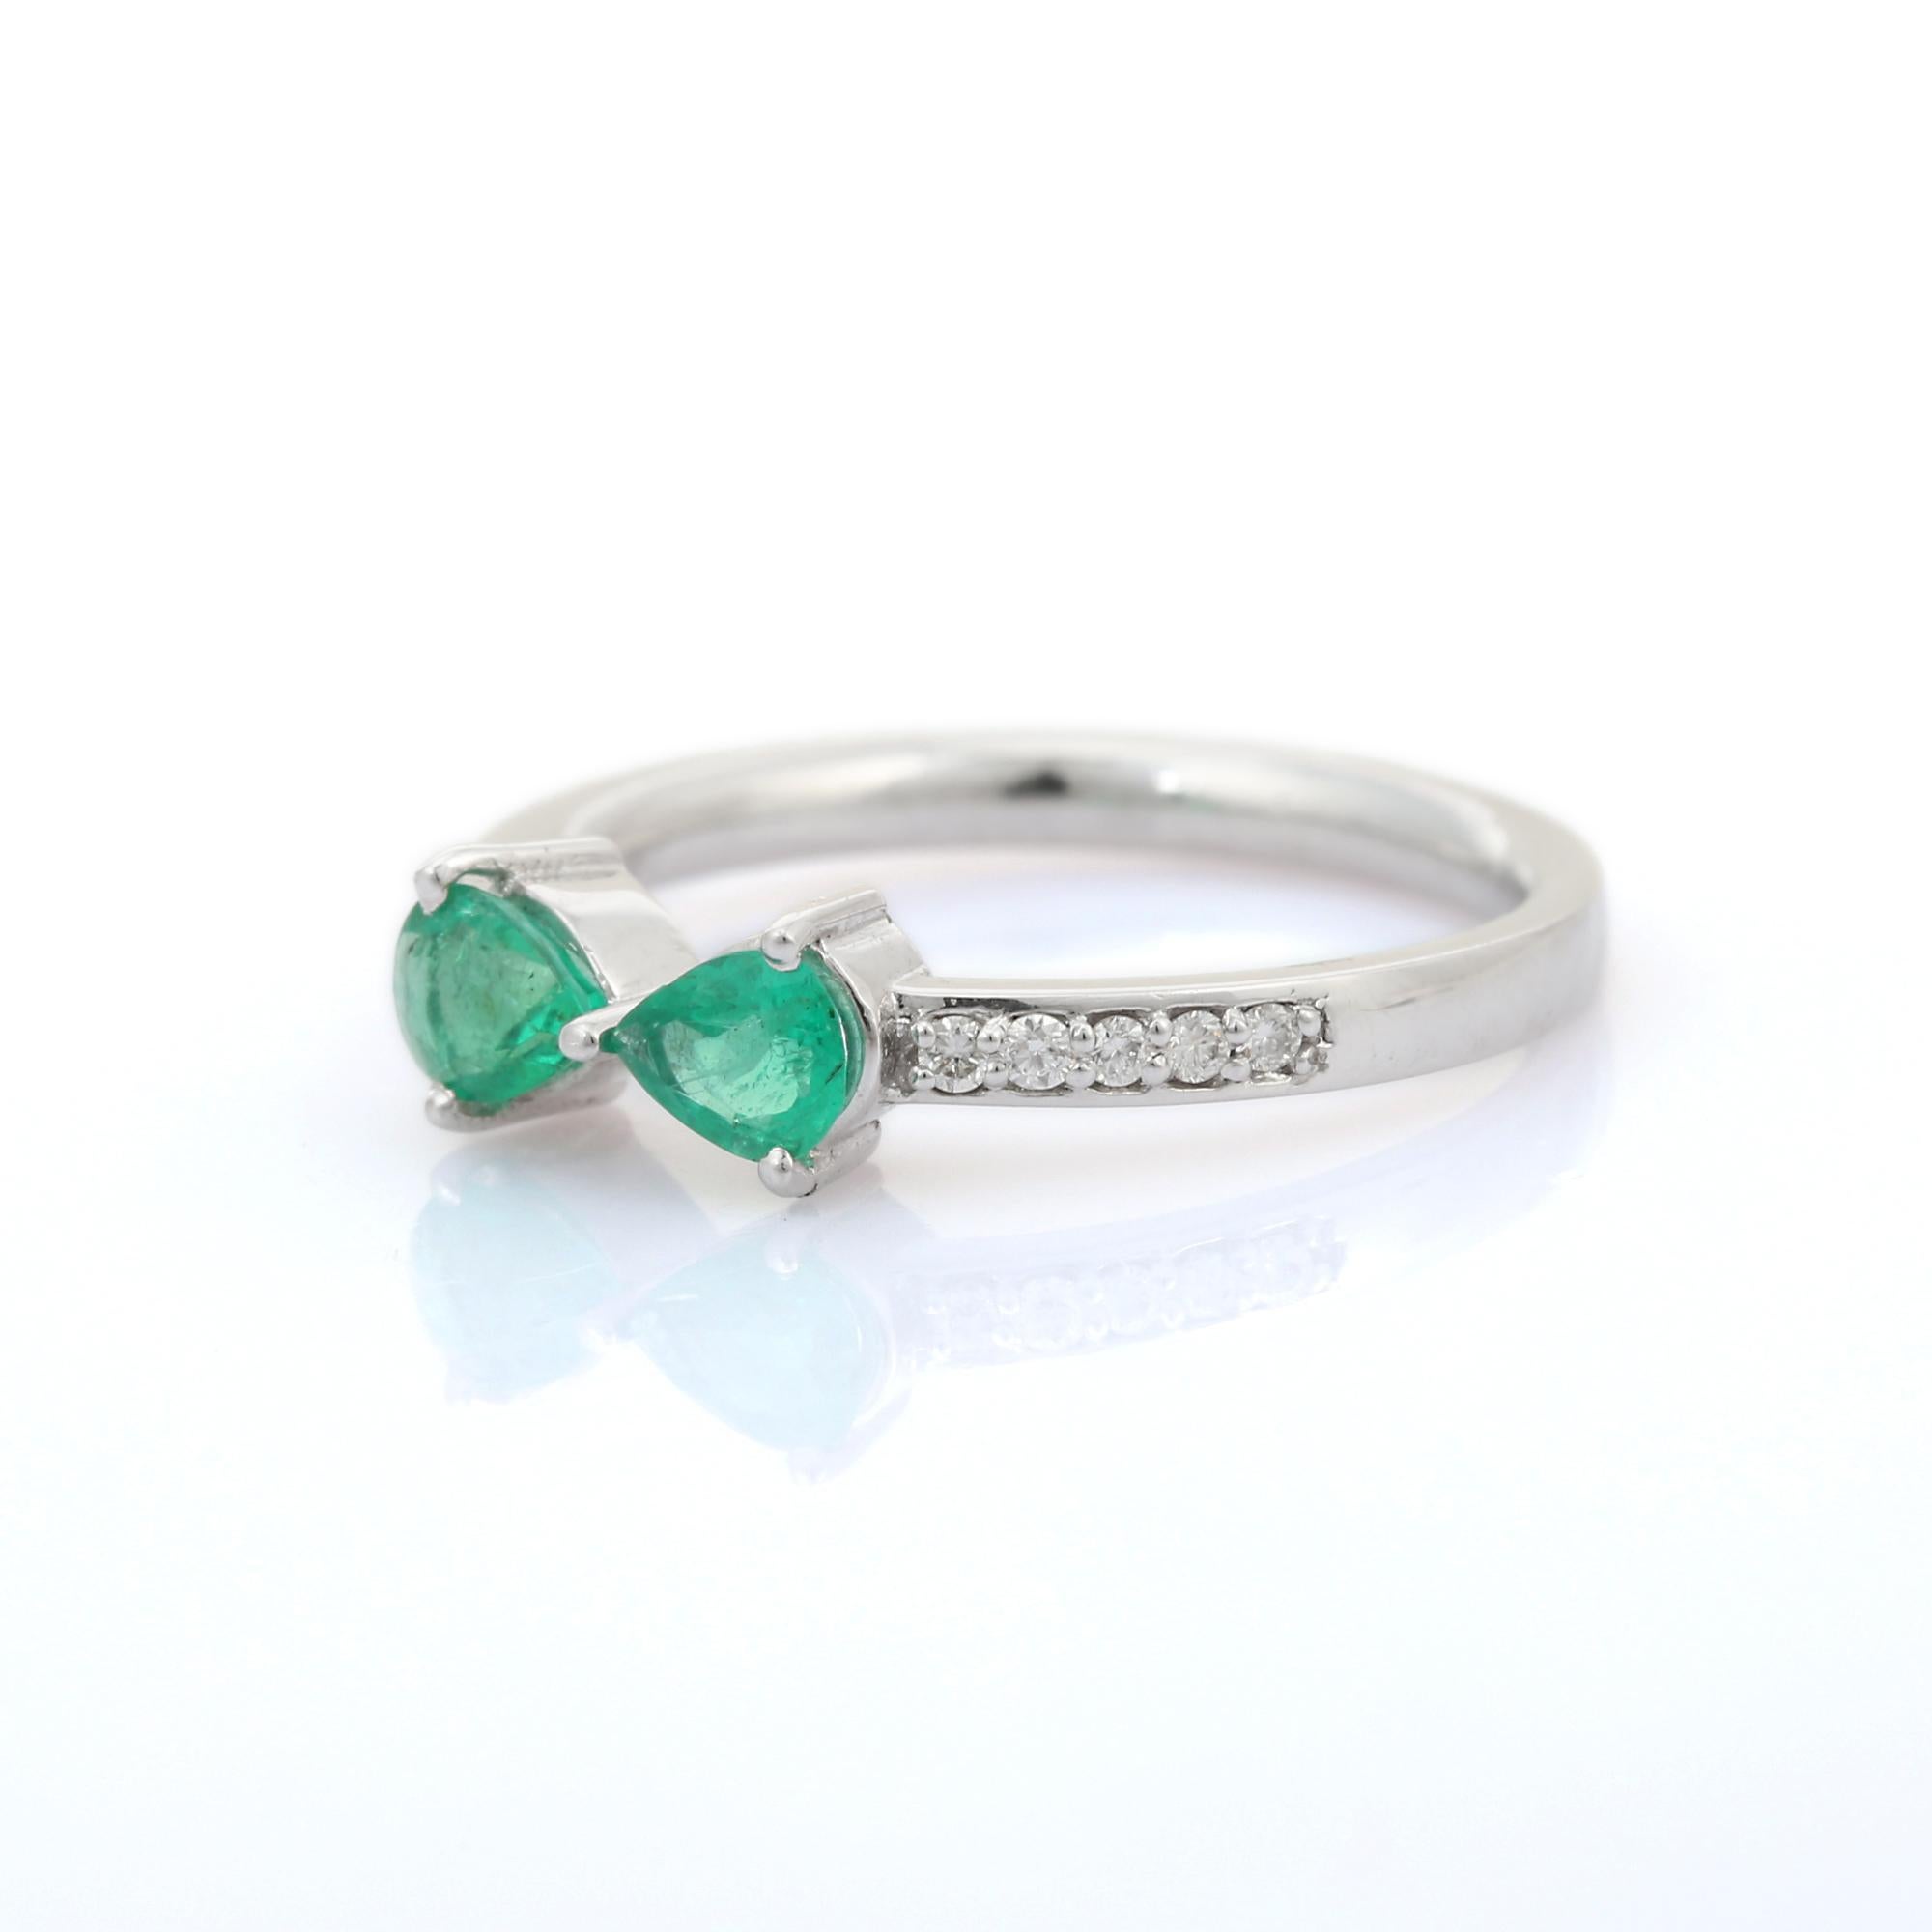 For Sale:  Natural Pear Cut Emerald Ring with Diamonds in 18K Solid White Gold 3